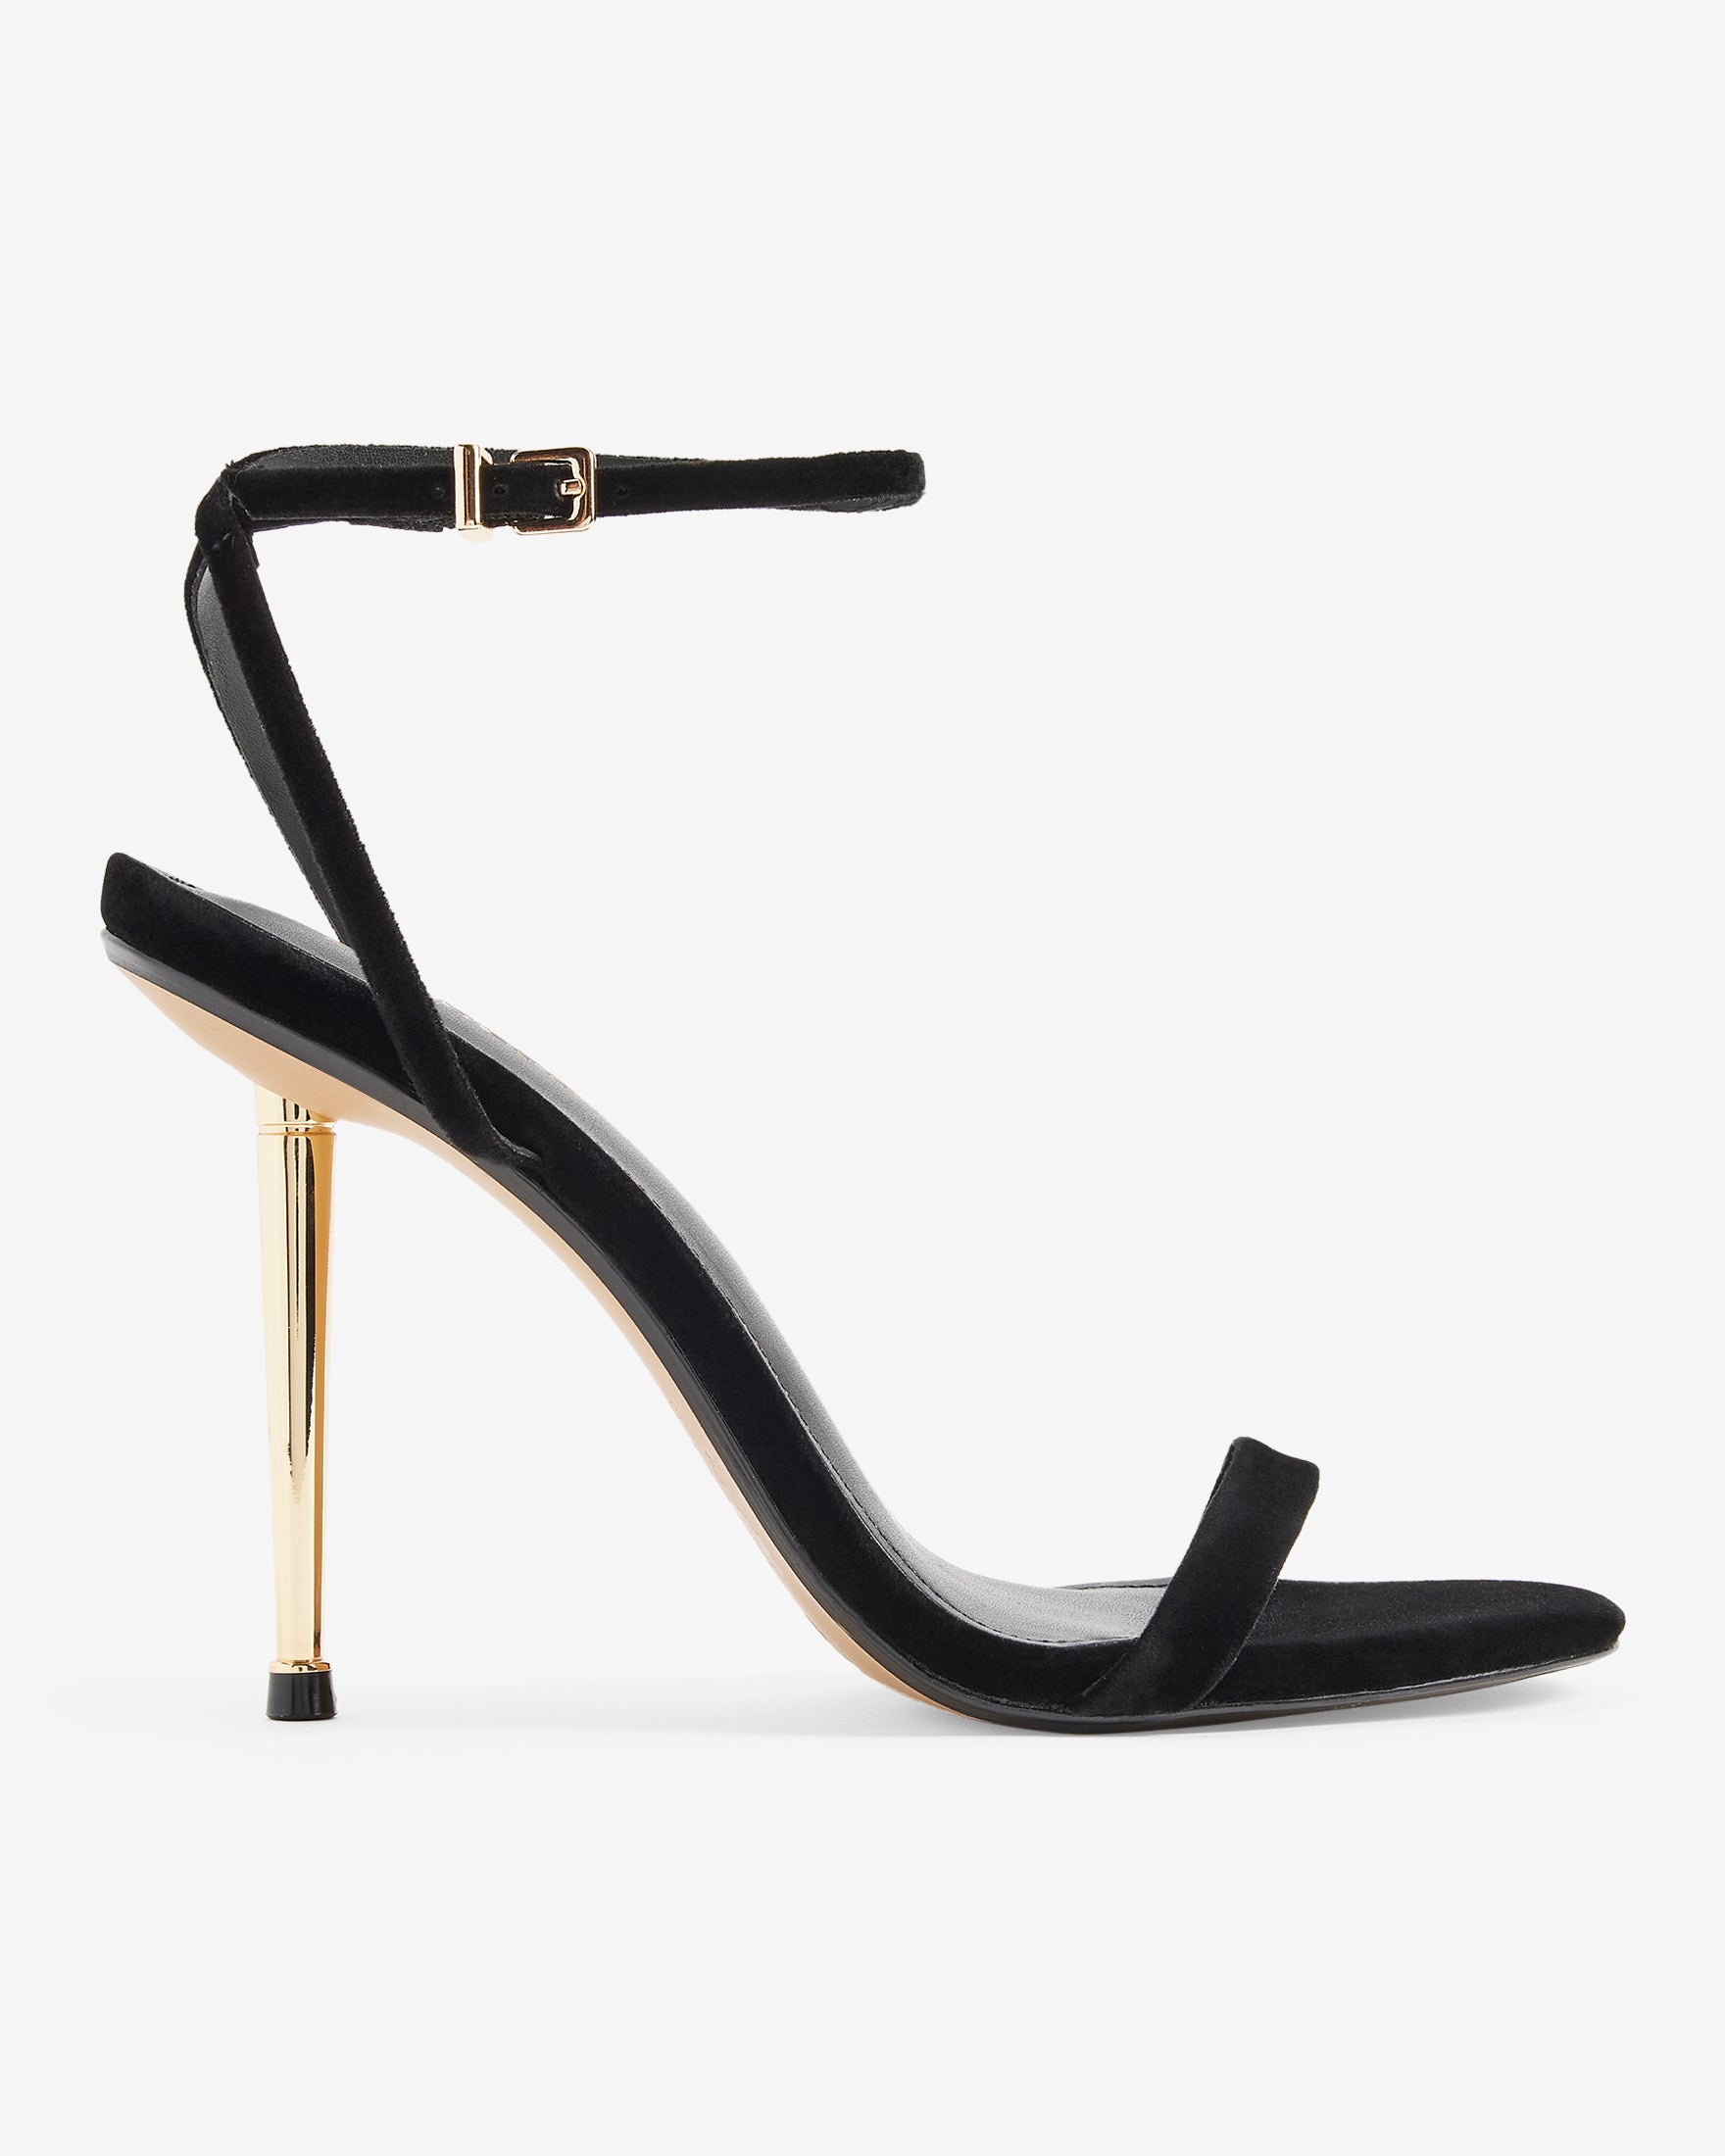 Black velvet open-toed shoes with thin gold heel